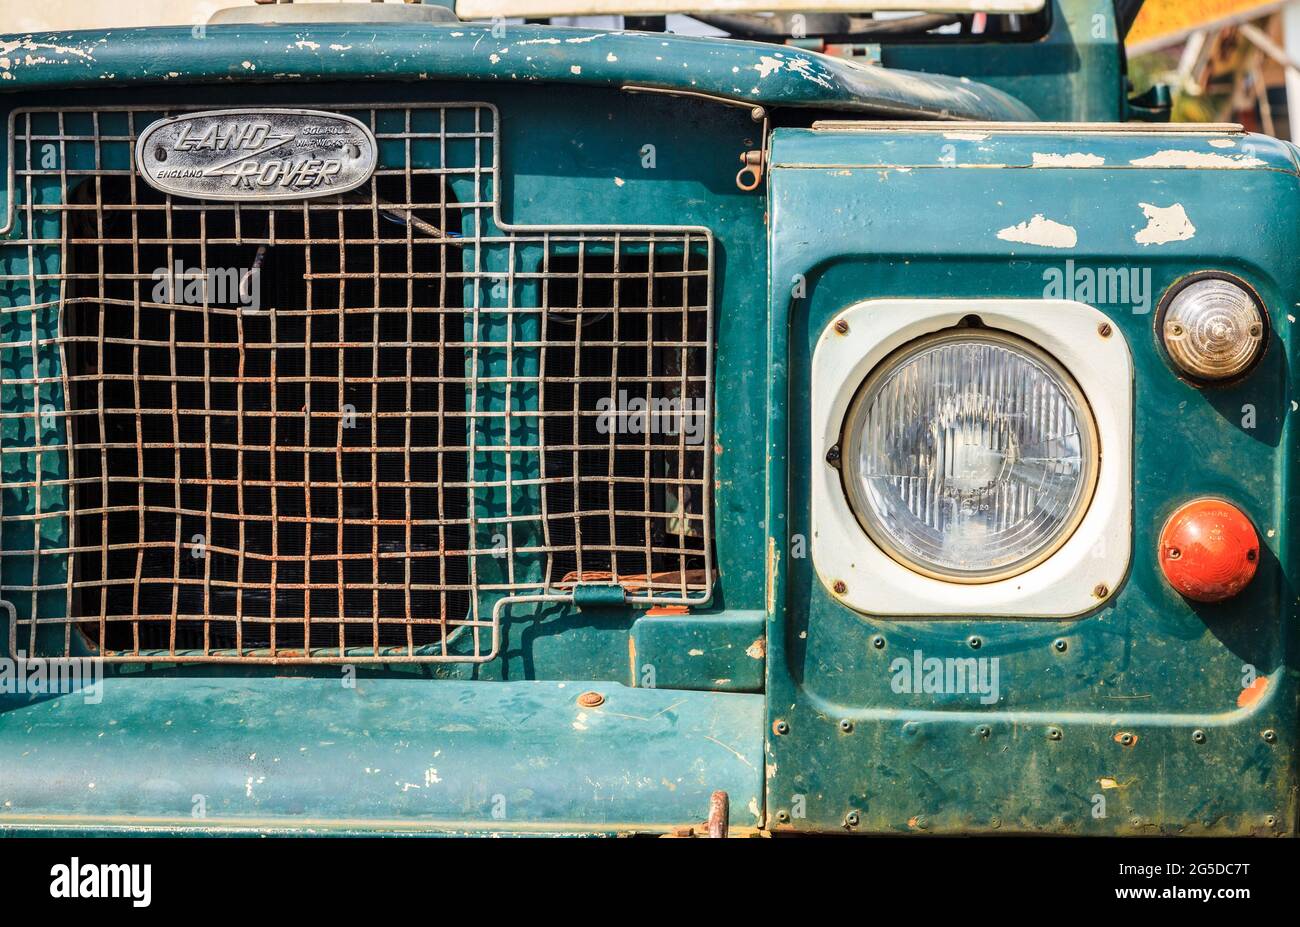 Details of the front grille of a vintage Landrover Stock Photo